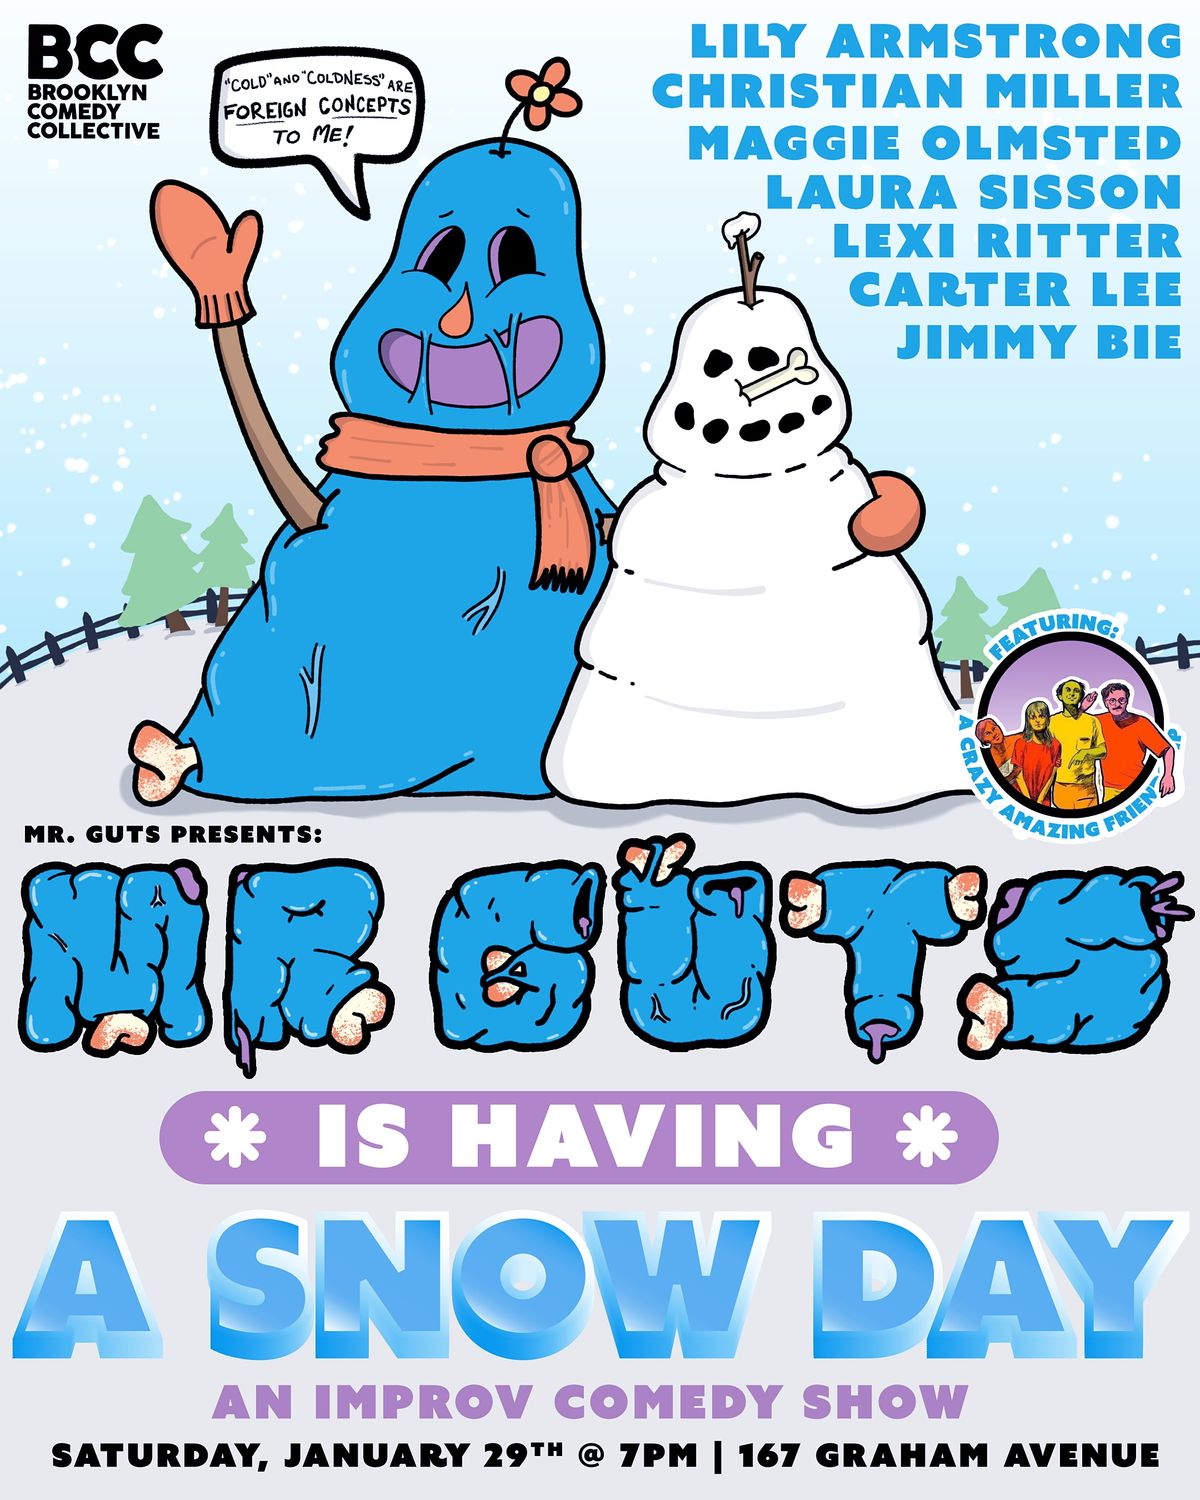 Mr. Guts is Having a Snow Day